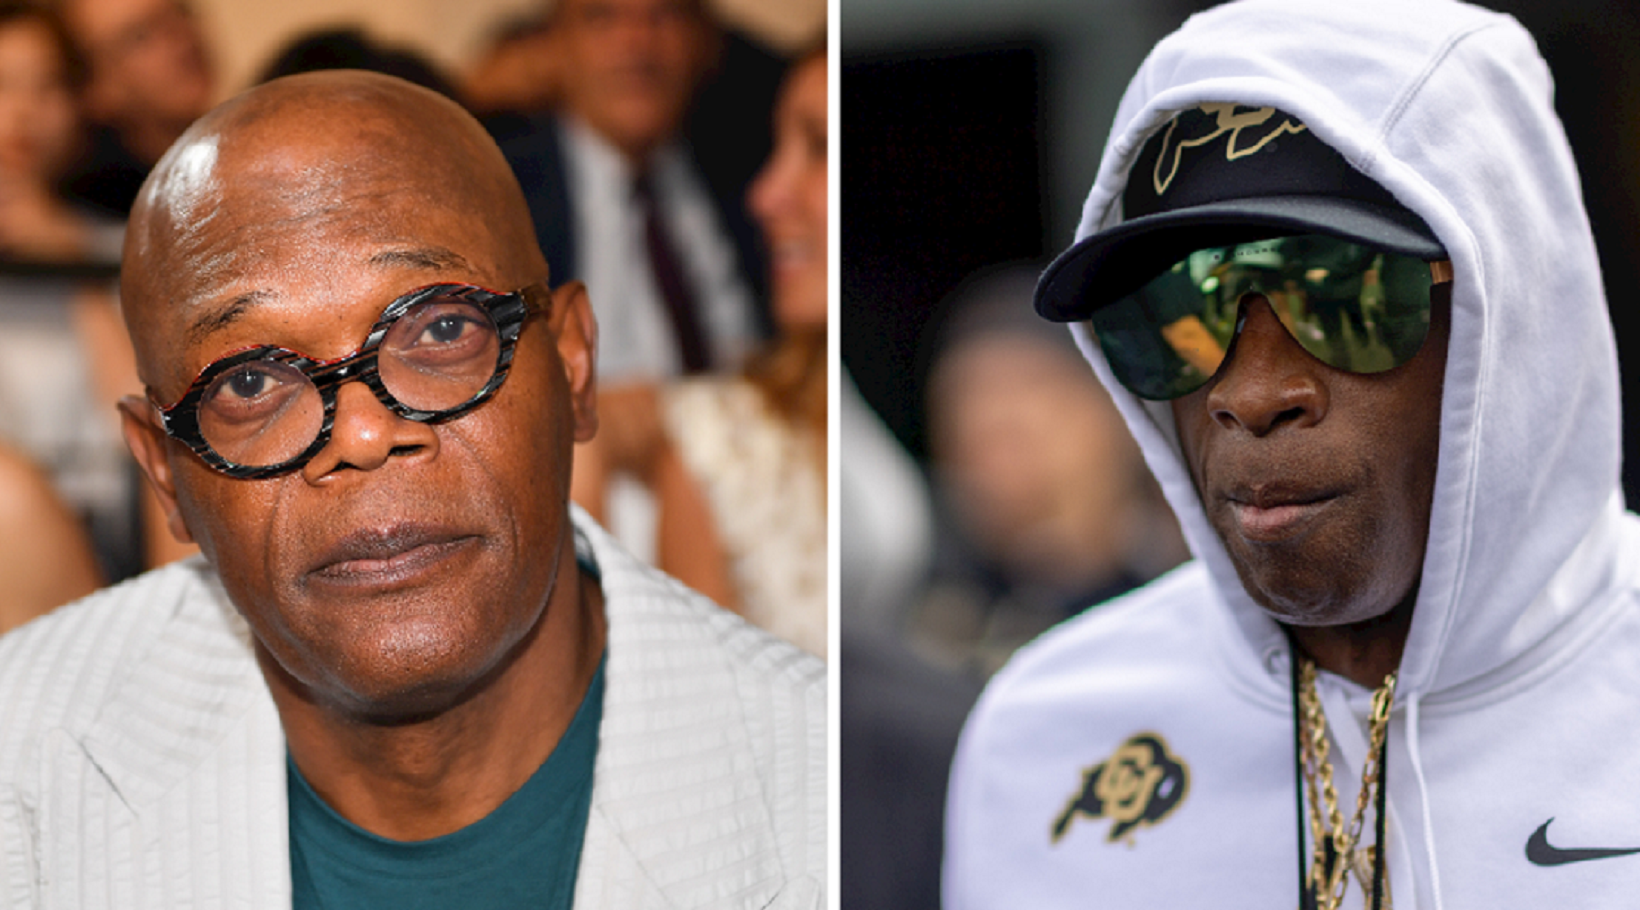 Following the Most Recent Defeat Against Oregon State, Samuel L. Jackson Unleashed a Furious Tirade at Deion Sanders’ Colorado Buffaloes